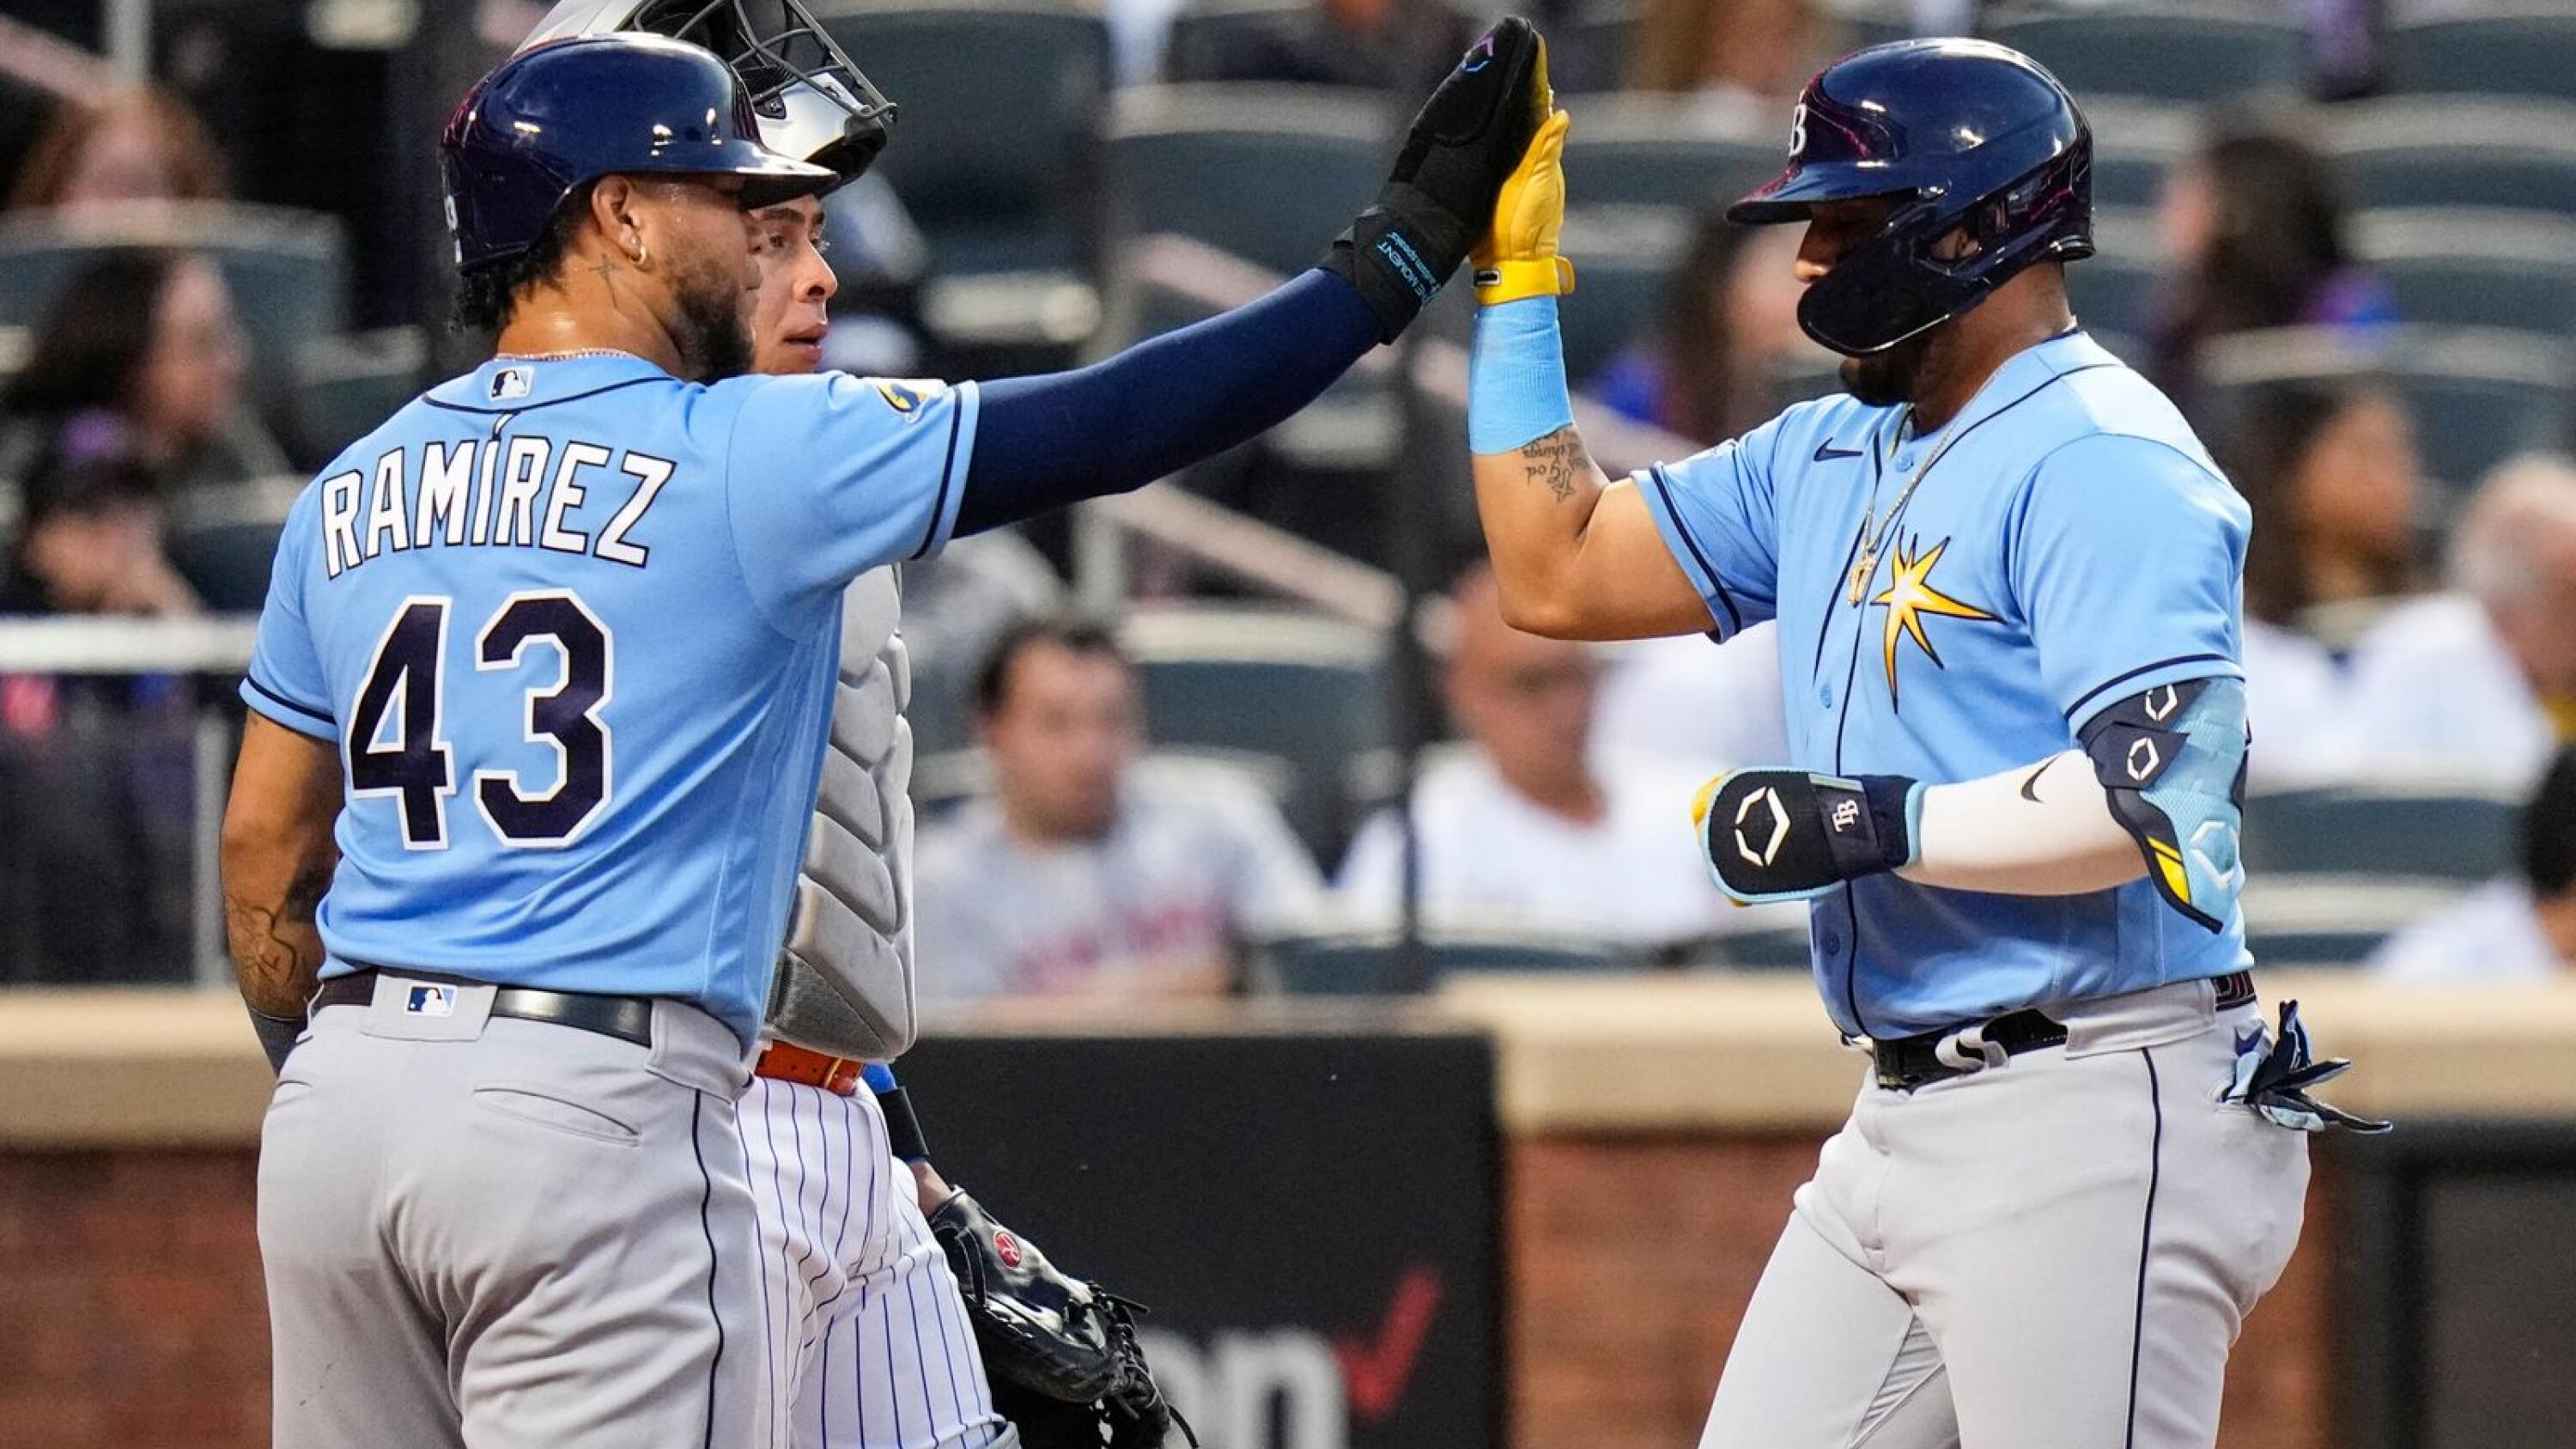 Paredes has 2 homers, 5 RBIs as Rays hammer Verlander and Mets 8-5